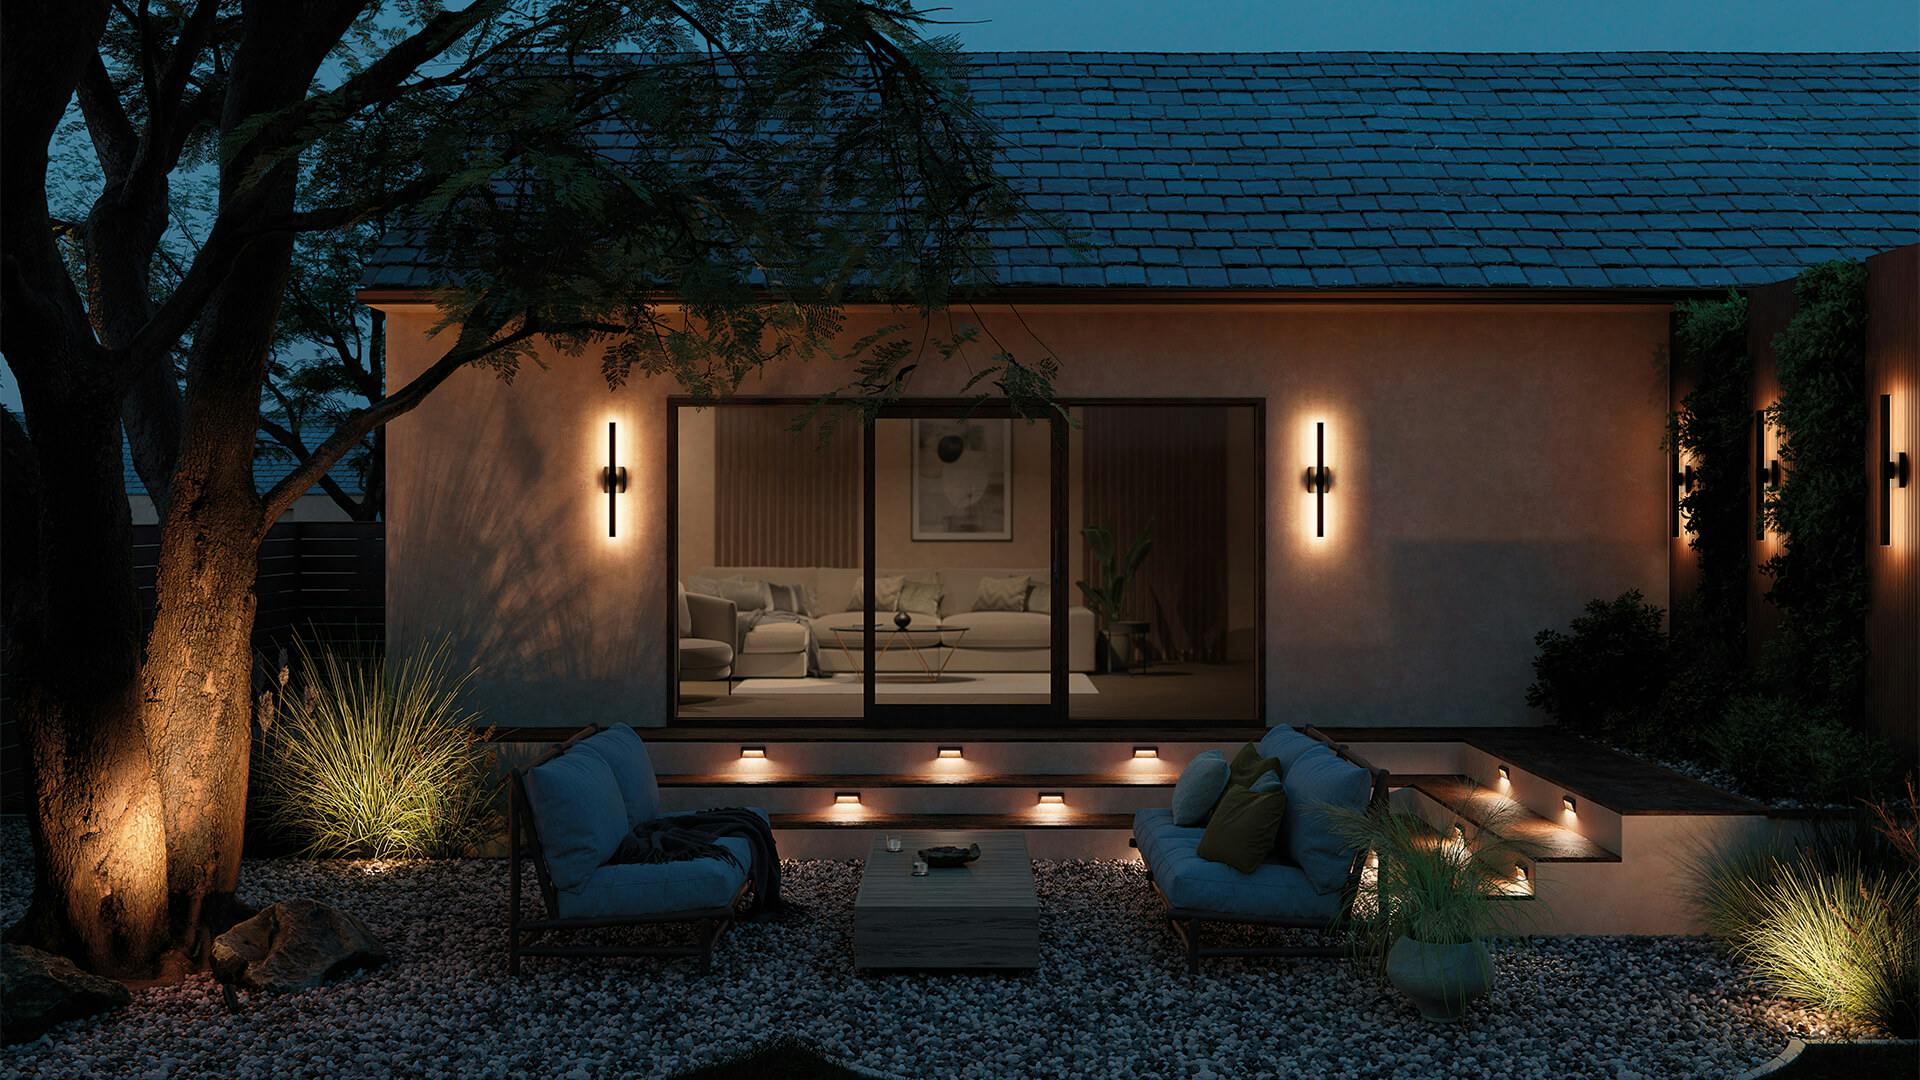 Nightime shot of exterior patio with nocar wall lights at night